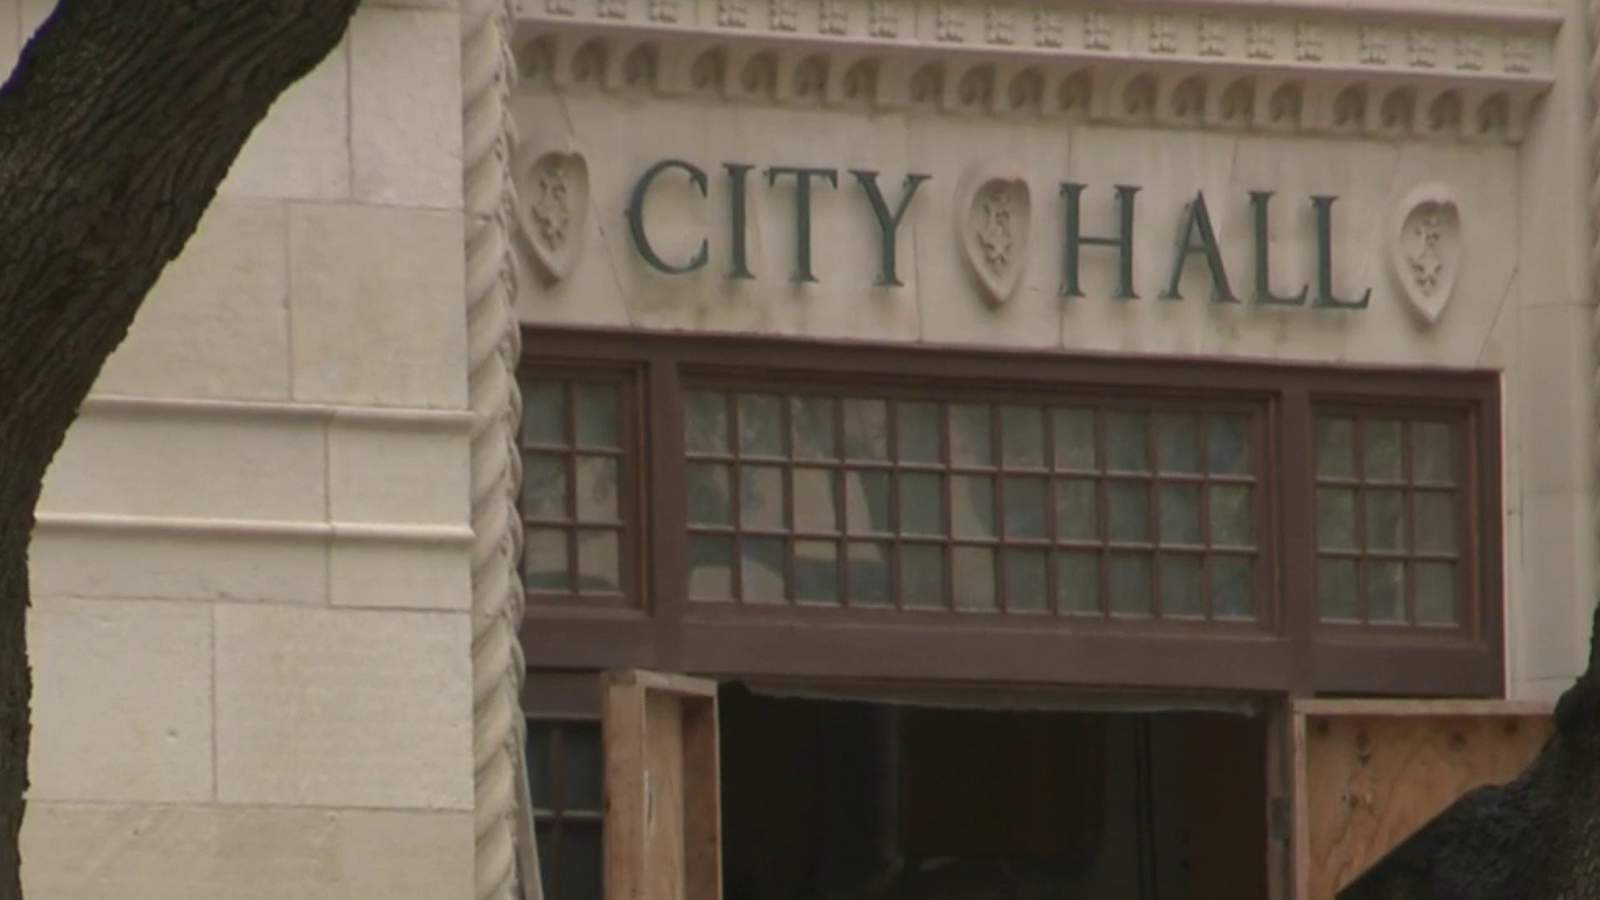 San Antonio’s historic City Hall building renovations are nearing the homestretch, but not without delays